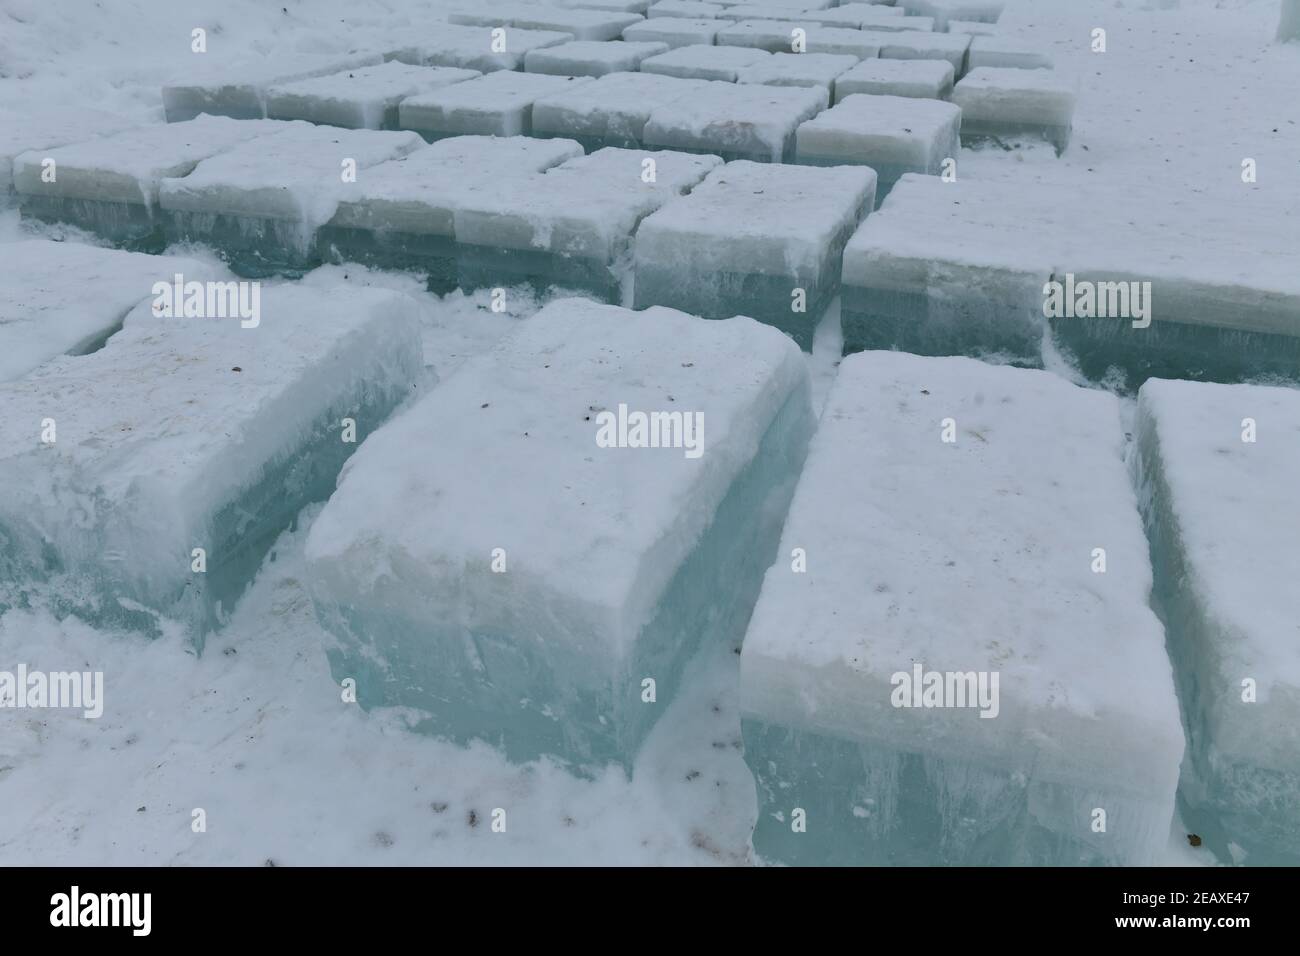 Winter scene with ice sculptures made from frozen blocks of lake water in the Adirondacks at Saranac Lake New York Stock Photo